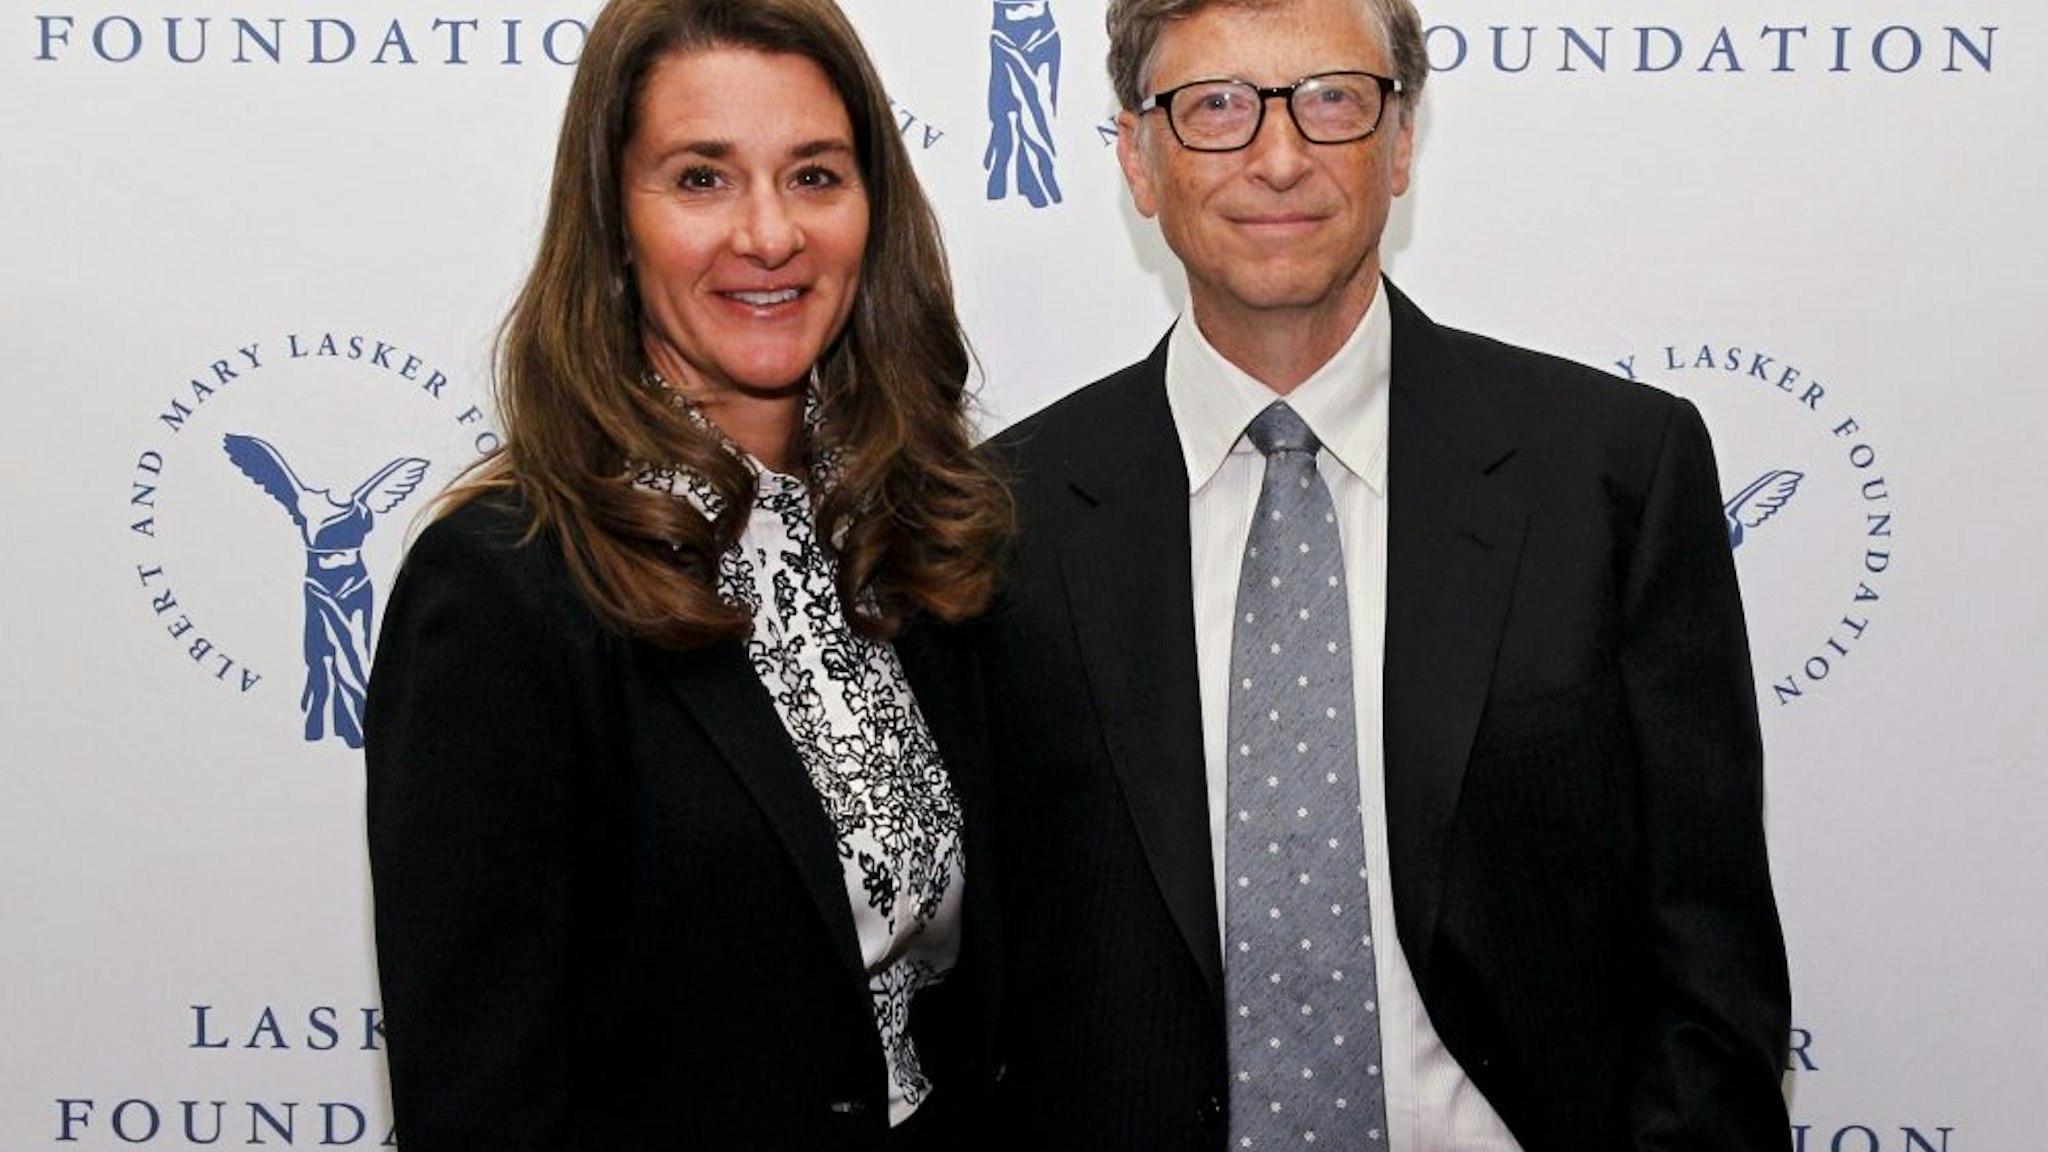 NEW YORK, NY - SEPTEMBER 20: Melinda Gates and Bill Gates of the Gates Foundation, winners of the Public Service Award, are seen during the The Lasker Awards 2013 on September 20, 2013 in New York City.